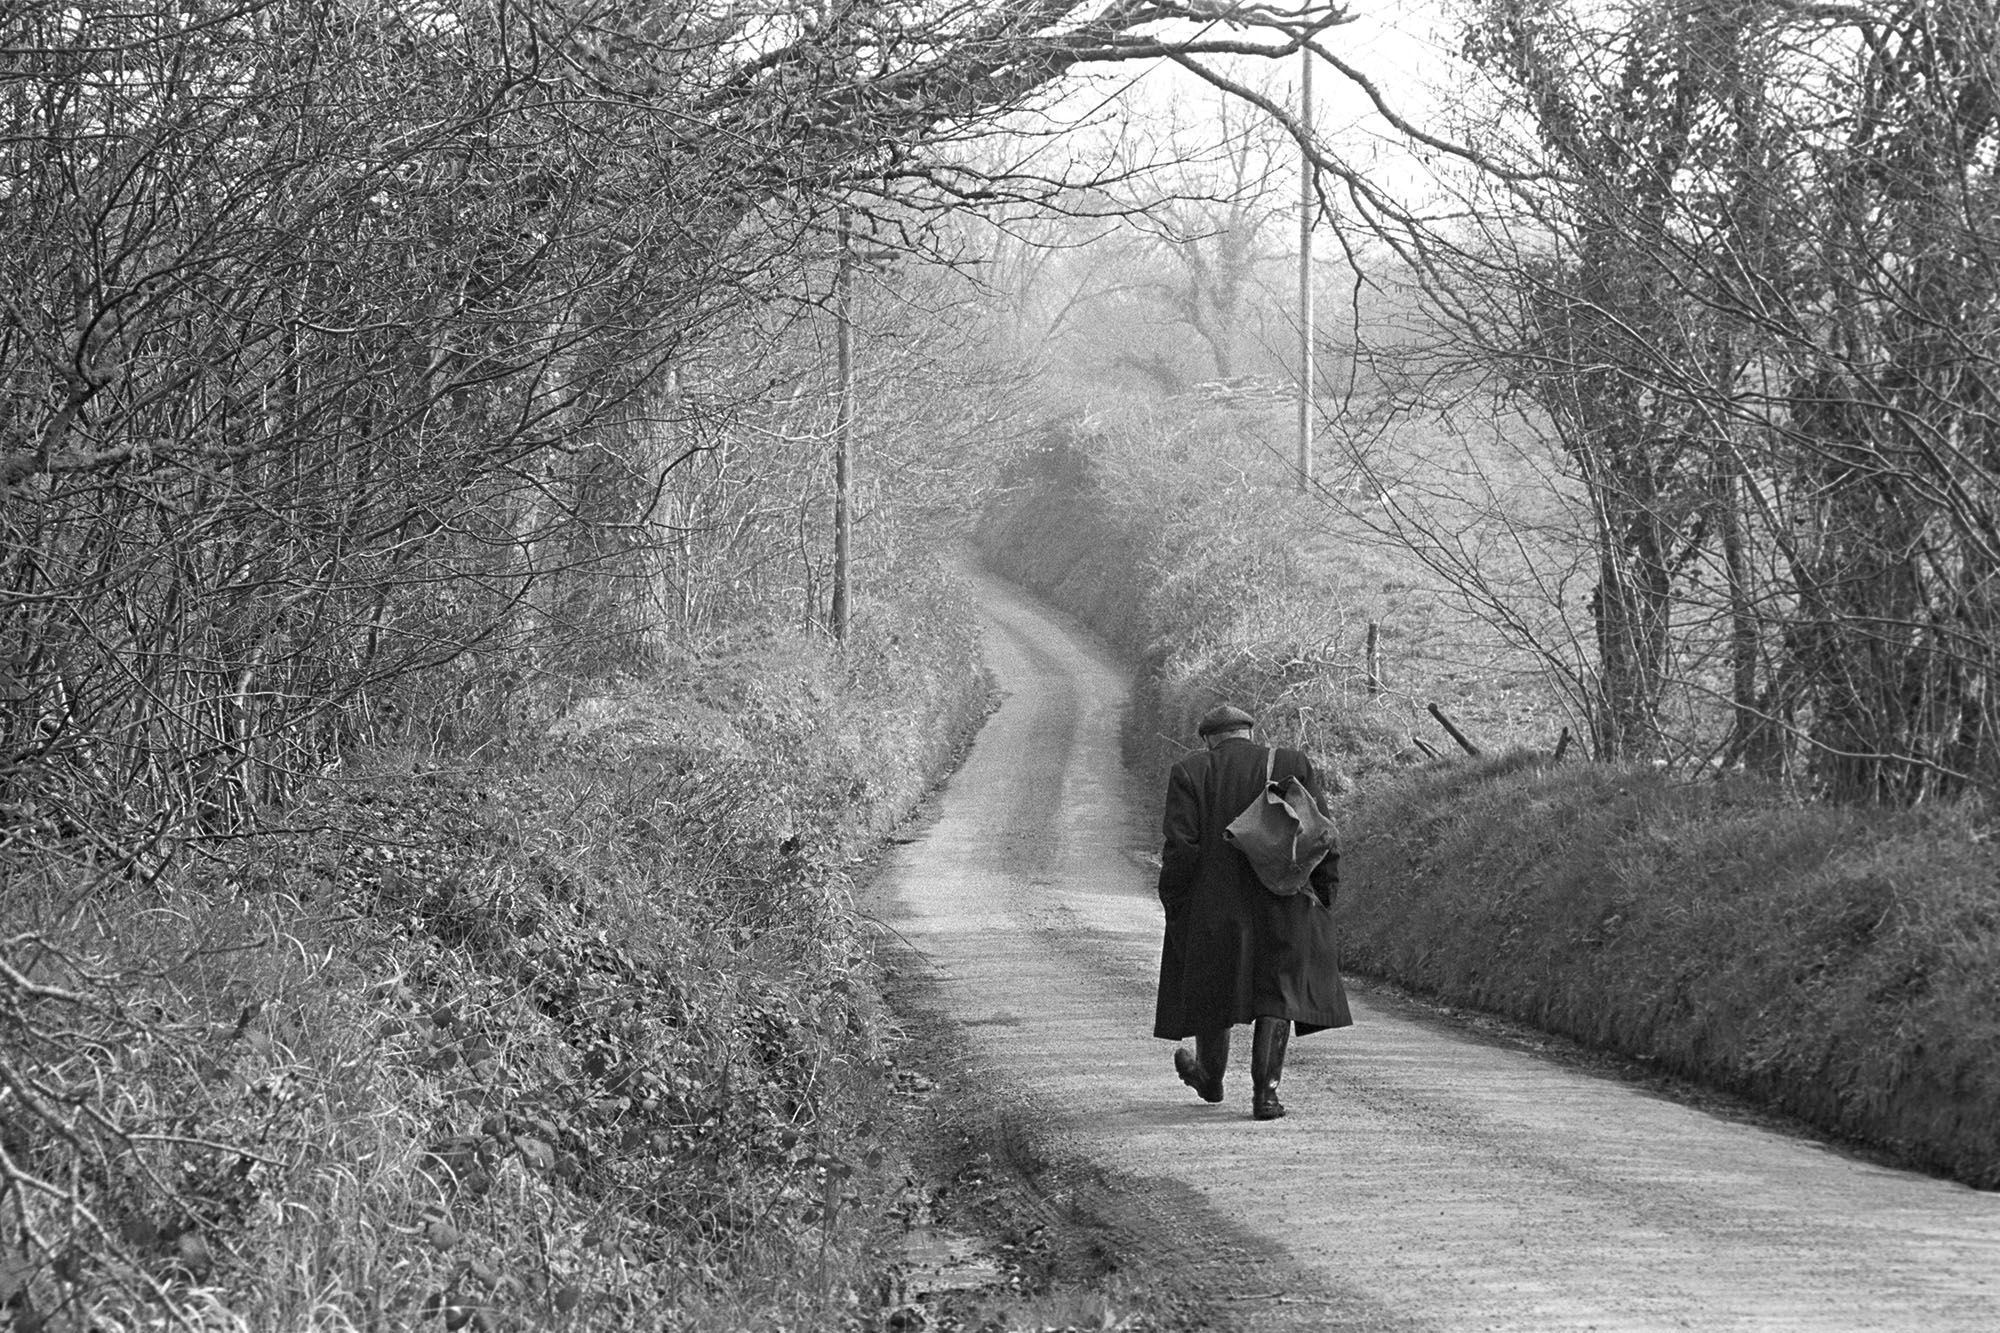 Farmworker walking up lane. 
[Ivor Brock walking along West Lane, Addisford, Dolton. The lane is flanked by trees and hedges.]